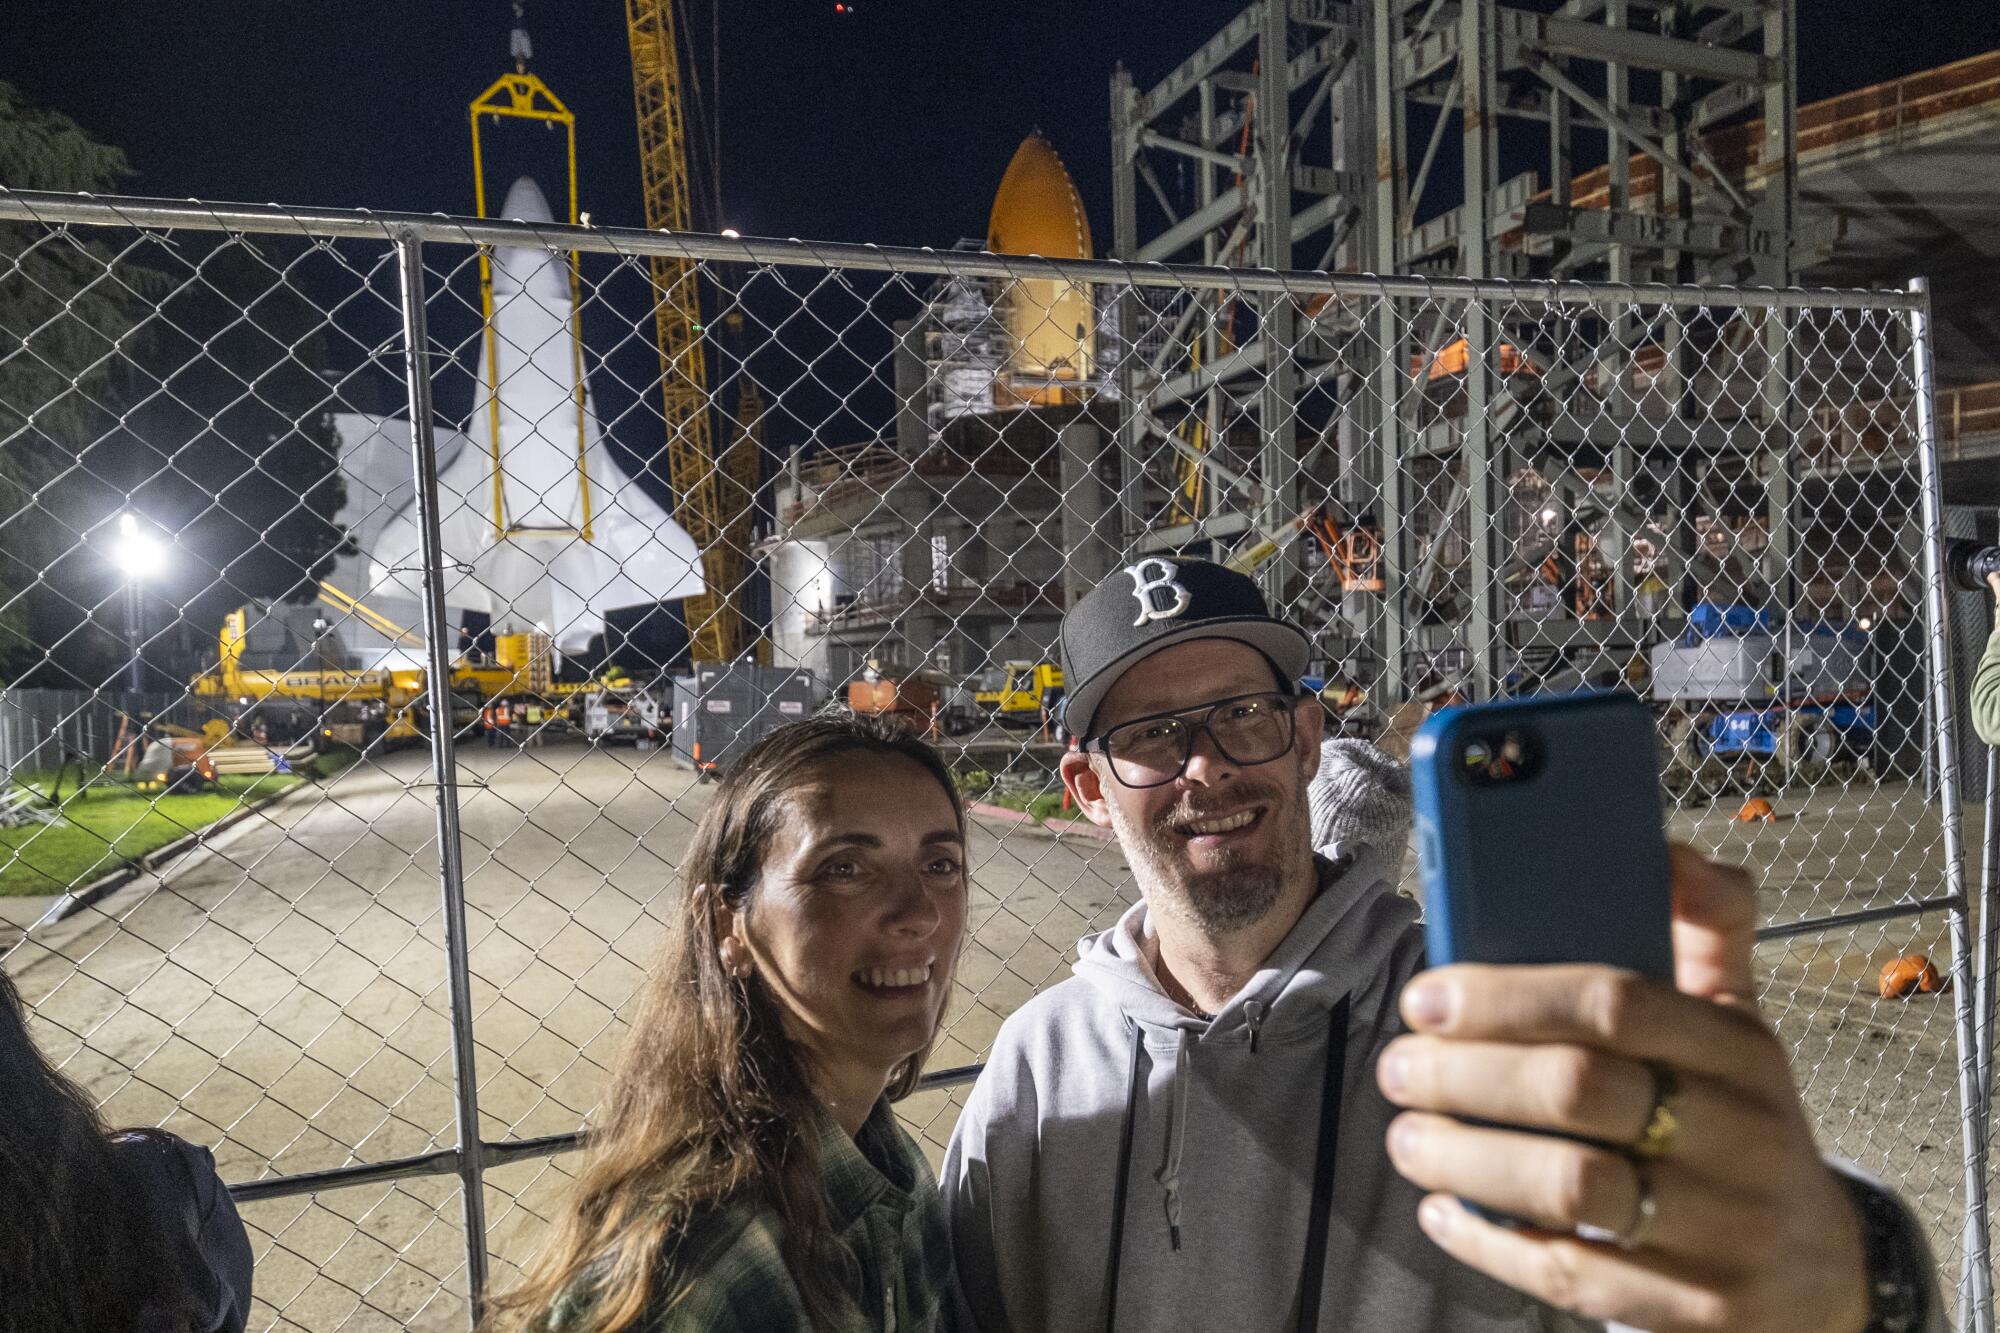 Piers Brinkley, right, and Clare David take photos in front of the space shuttle Endeavour.